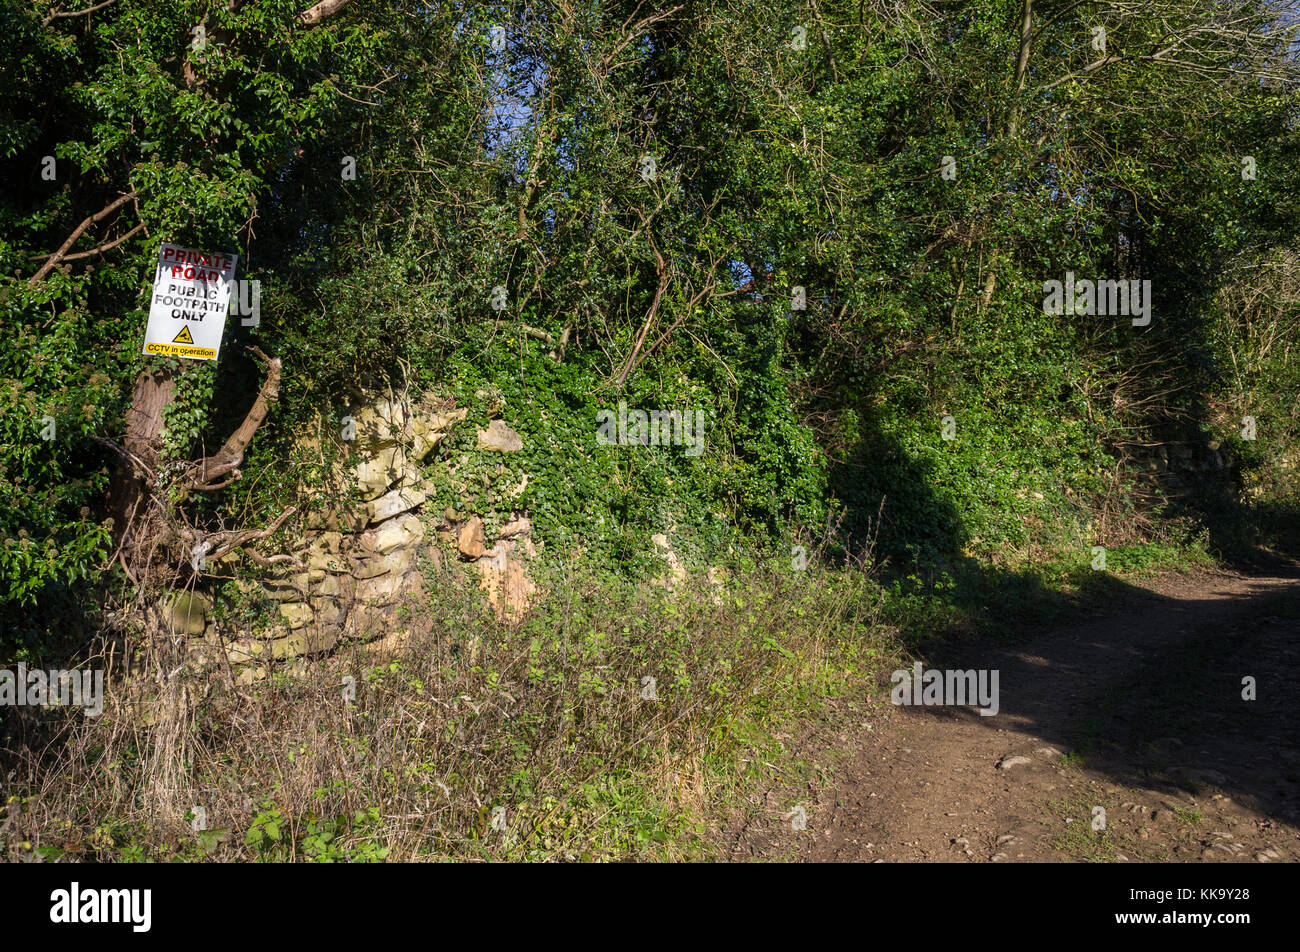 Private road and public footpath only sign. Stock Photo